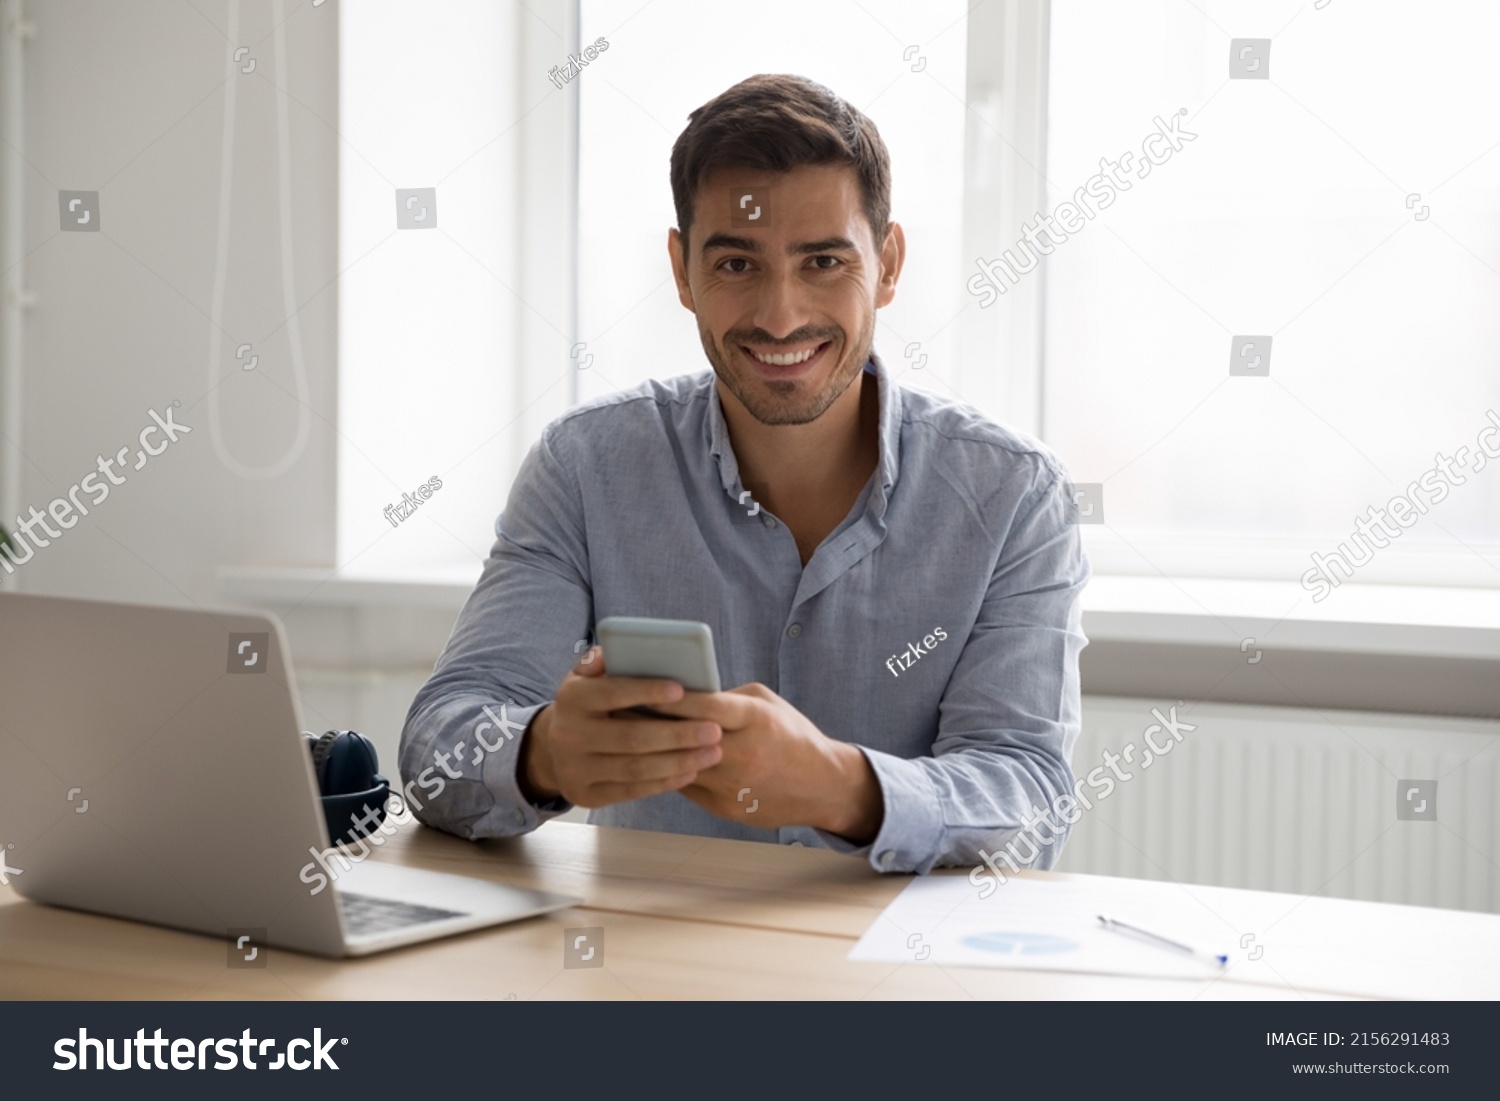 Happy digital gadgets user man using smartphone, laptop at home workplace head shot portrait. Young handsome business man holding mobile phone, sitting at computer, looking at camera #2156291483